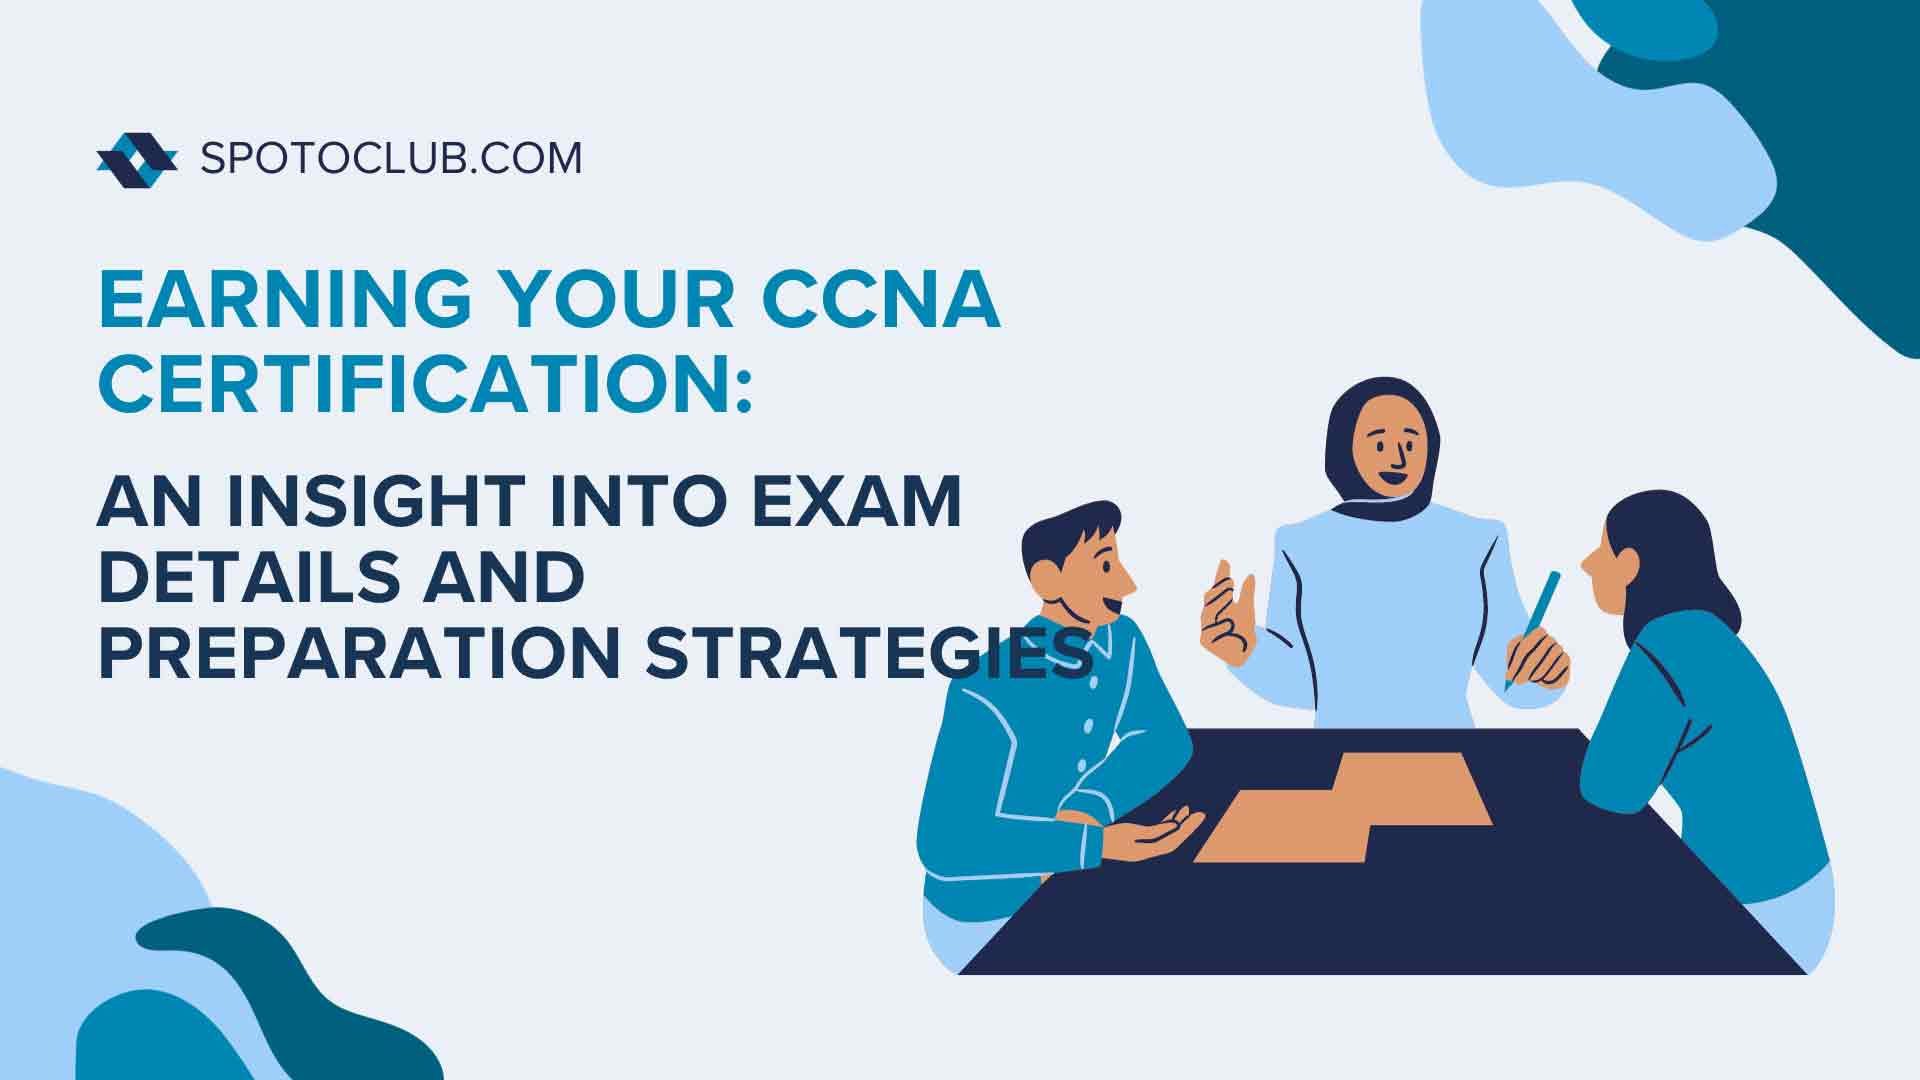 Earning Your CCNA Certification: An Insight into Exam Details and Preparation Strategies